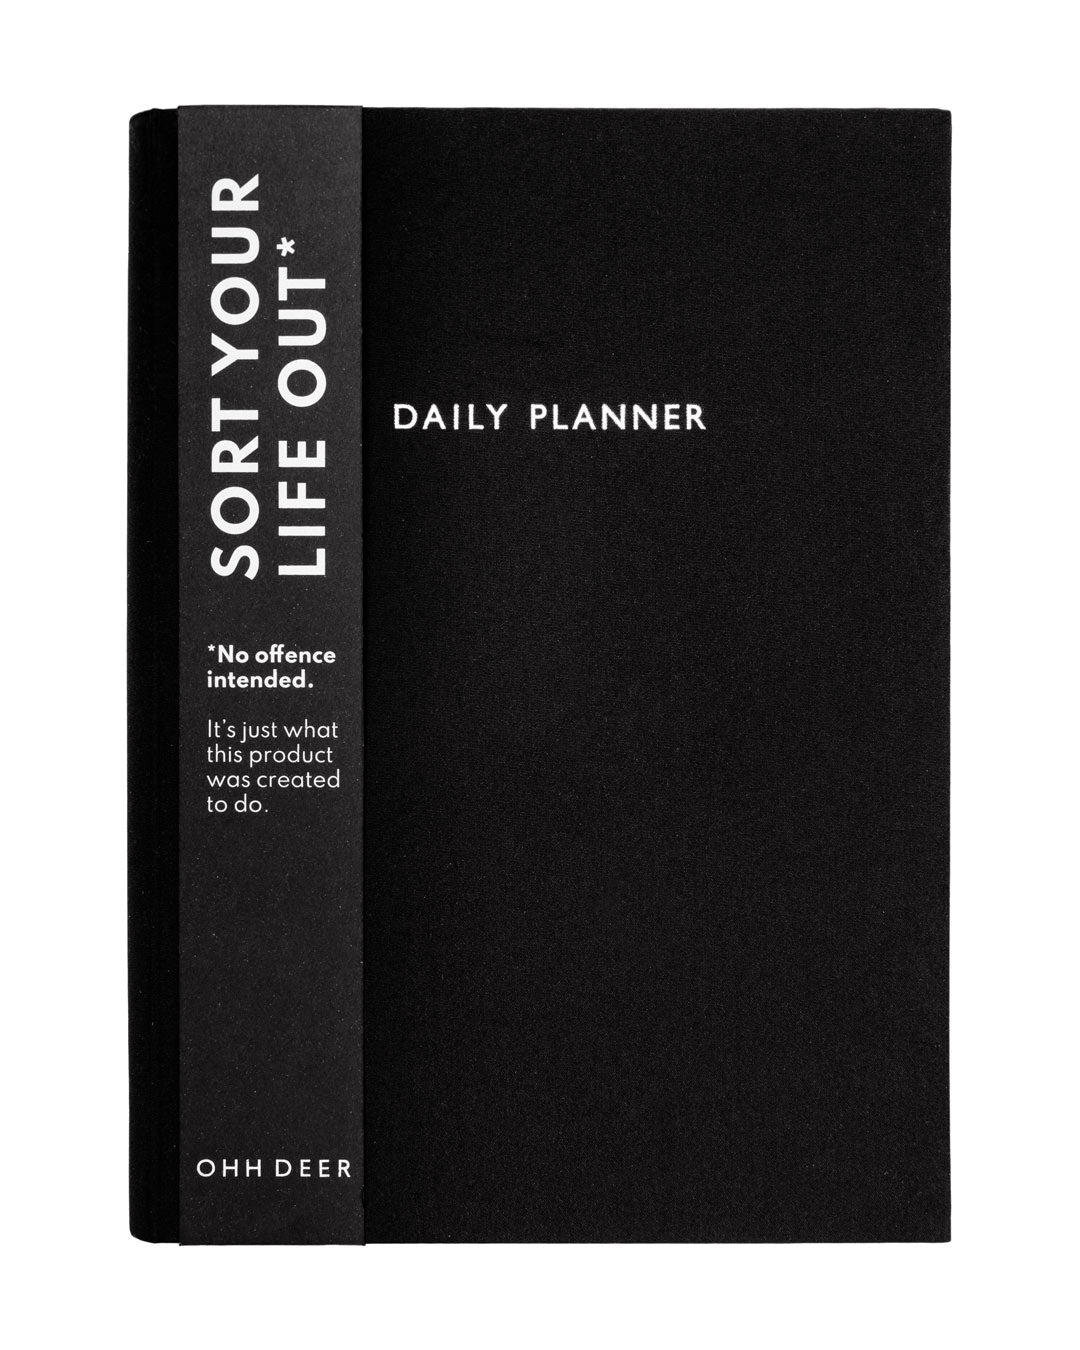 Daily Planner Notebook - A5 Undated Productivity Journal - To Do List, Hourly Schedule, Priorities and Notes - for Students, Home or Office - Black